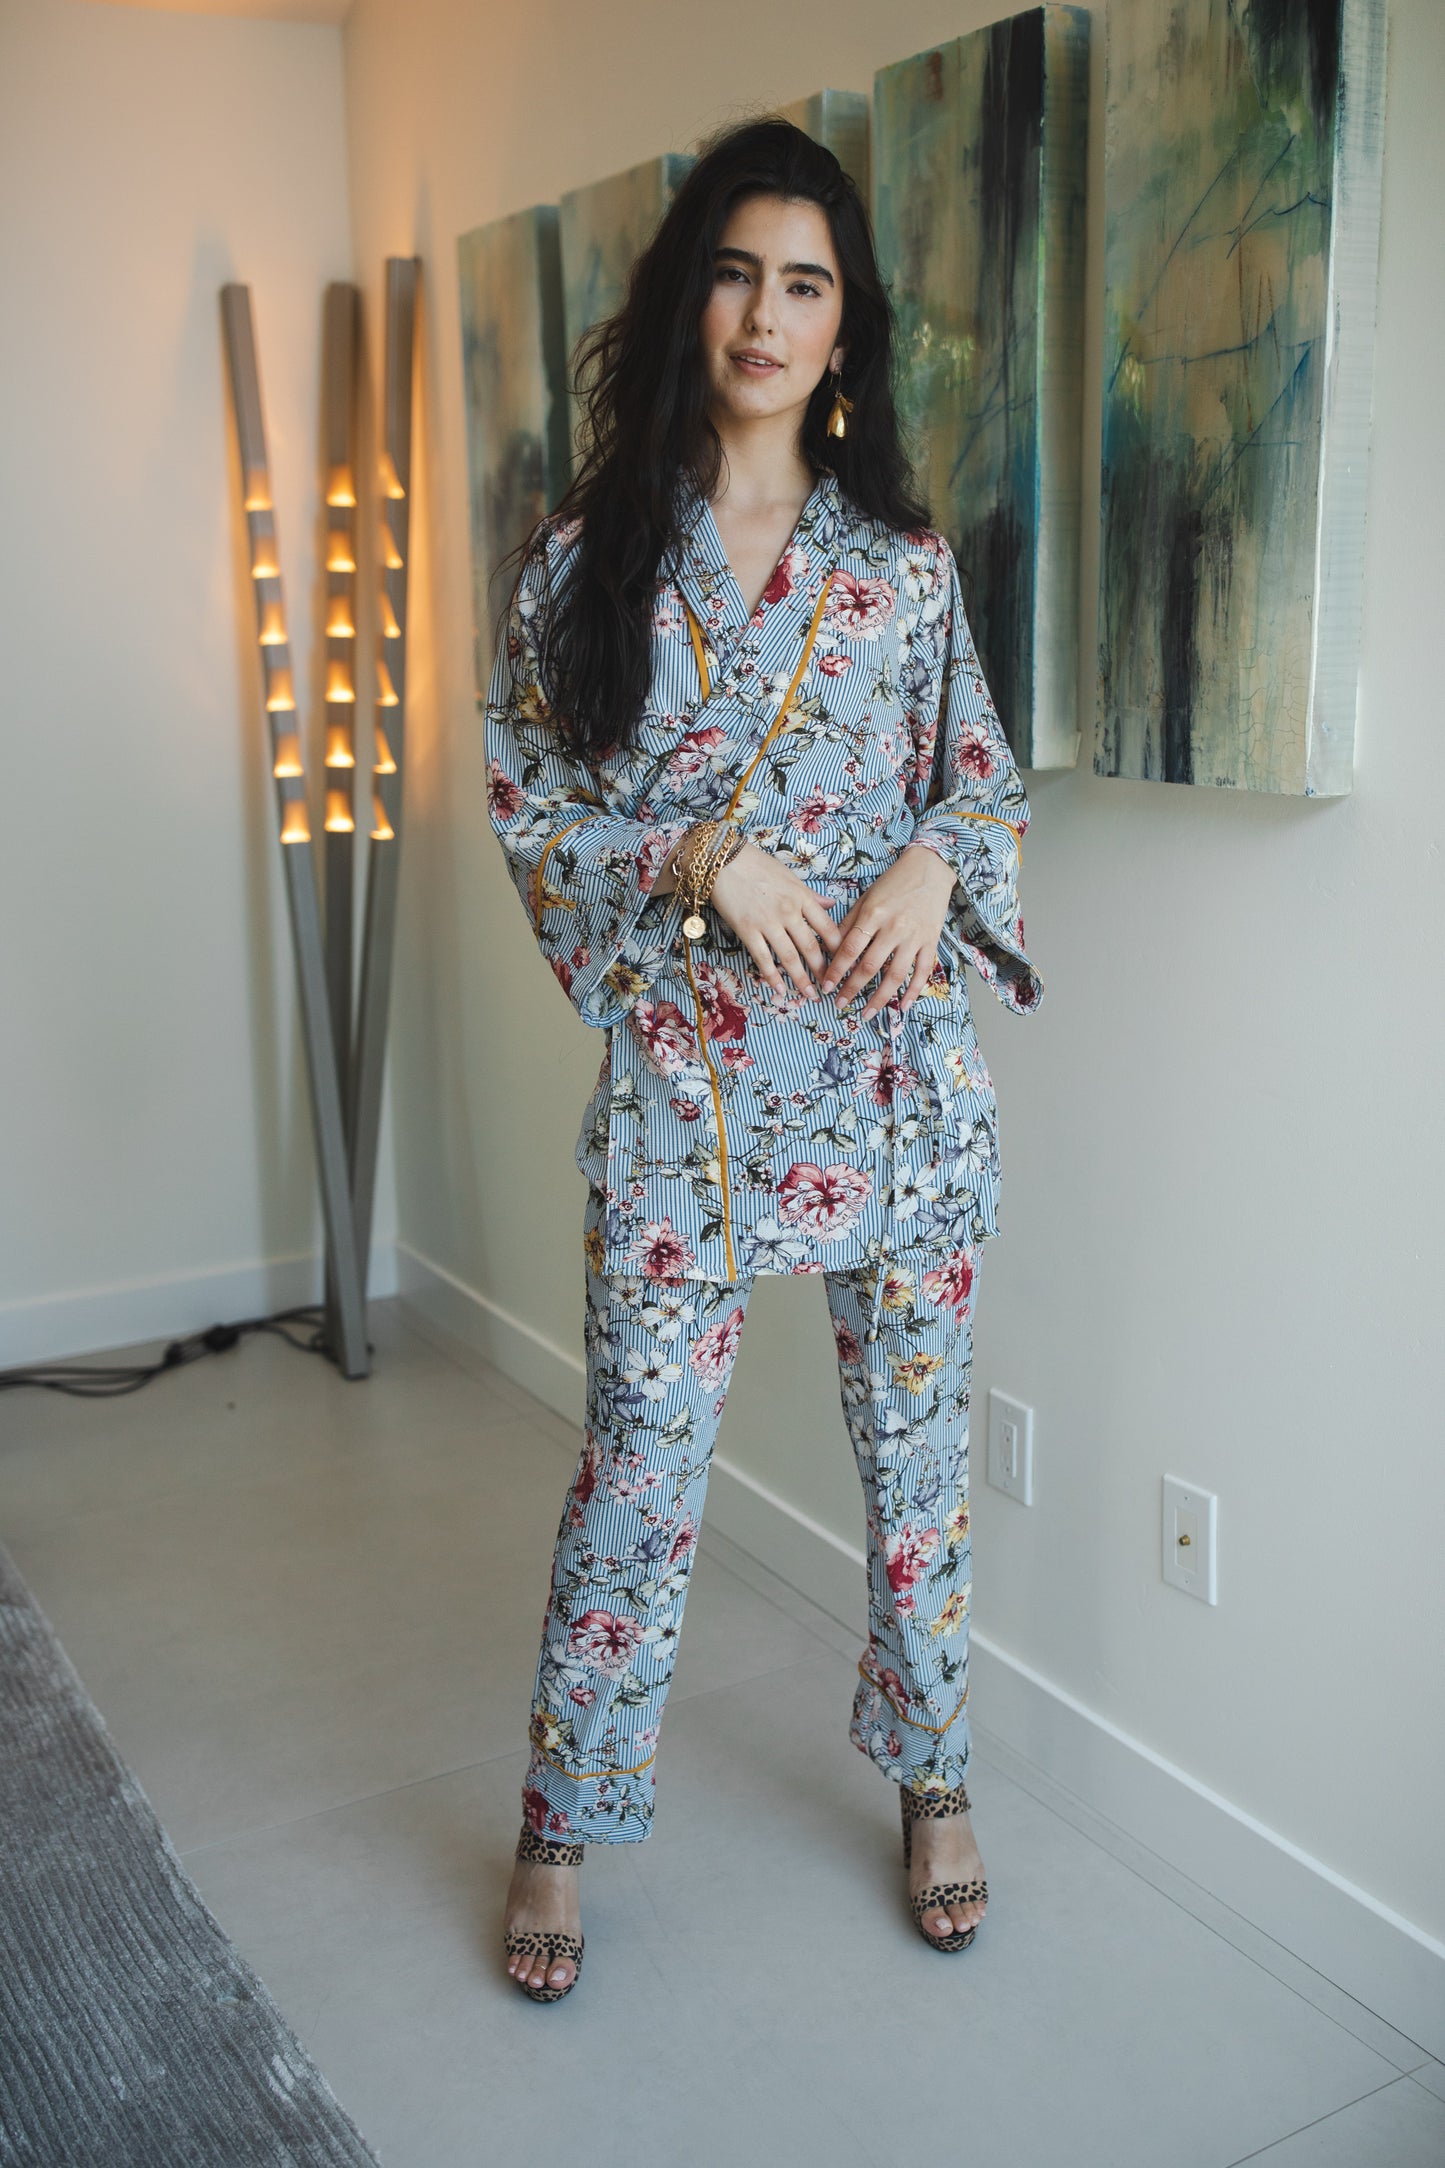 Jennafer Grace Dolce Deaux Paglamas white blue pinstripe floral pink flowers orange piping glam pajamas pjs co-ord coord matching set lounge wear wrap top tapered pant boho bohemian hippie unisex handmade in California USA